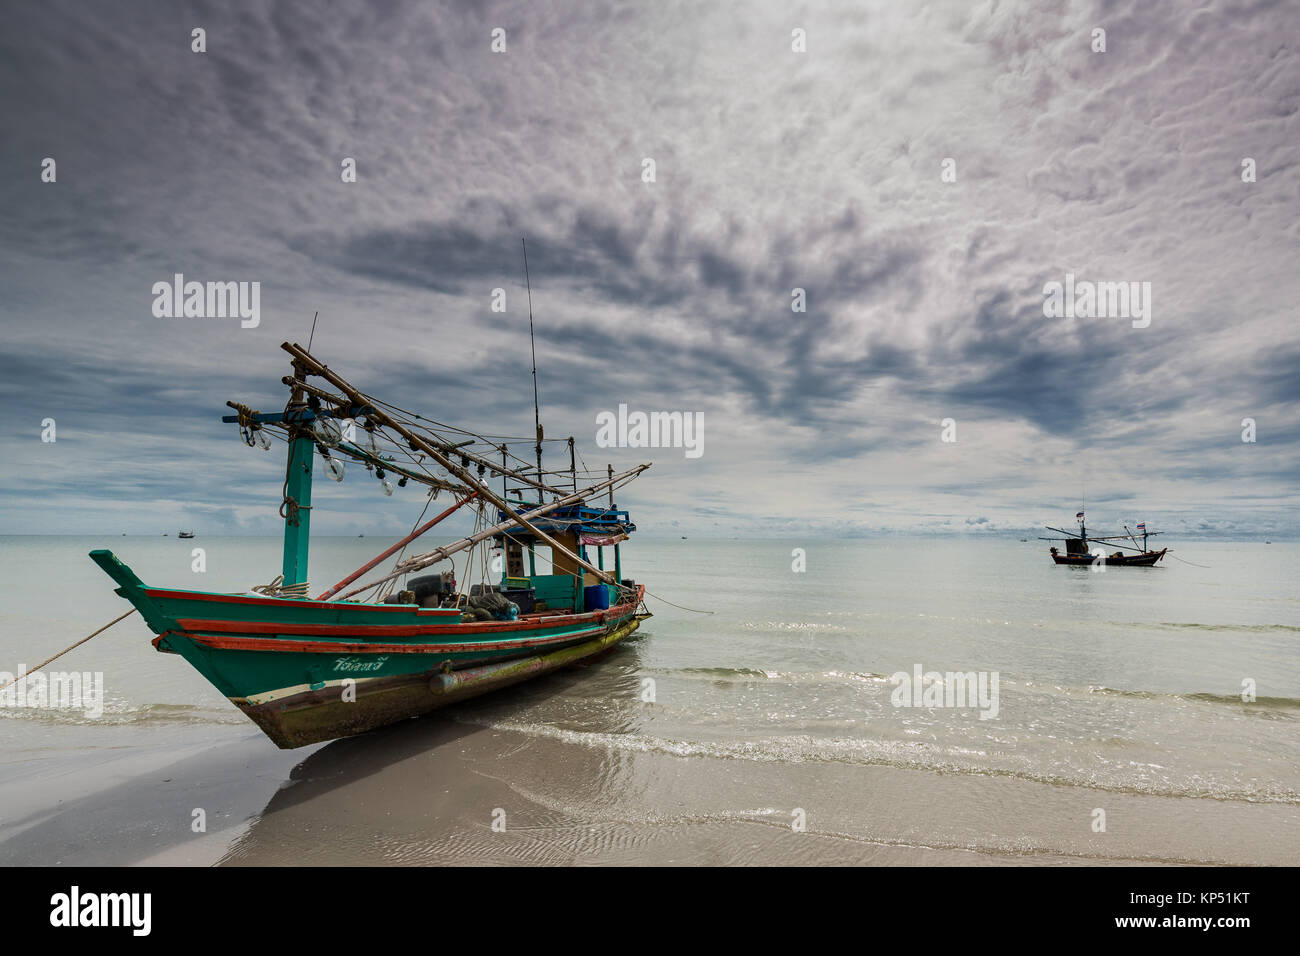 Old fishing boat in Khao Takiab close to Hua Hin in Thailand. Hua Hin is 2-3 hours drive south of Bangkok. It's a popular beach destination. Stock Photo